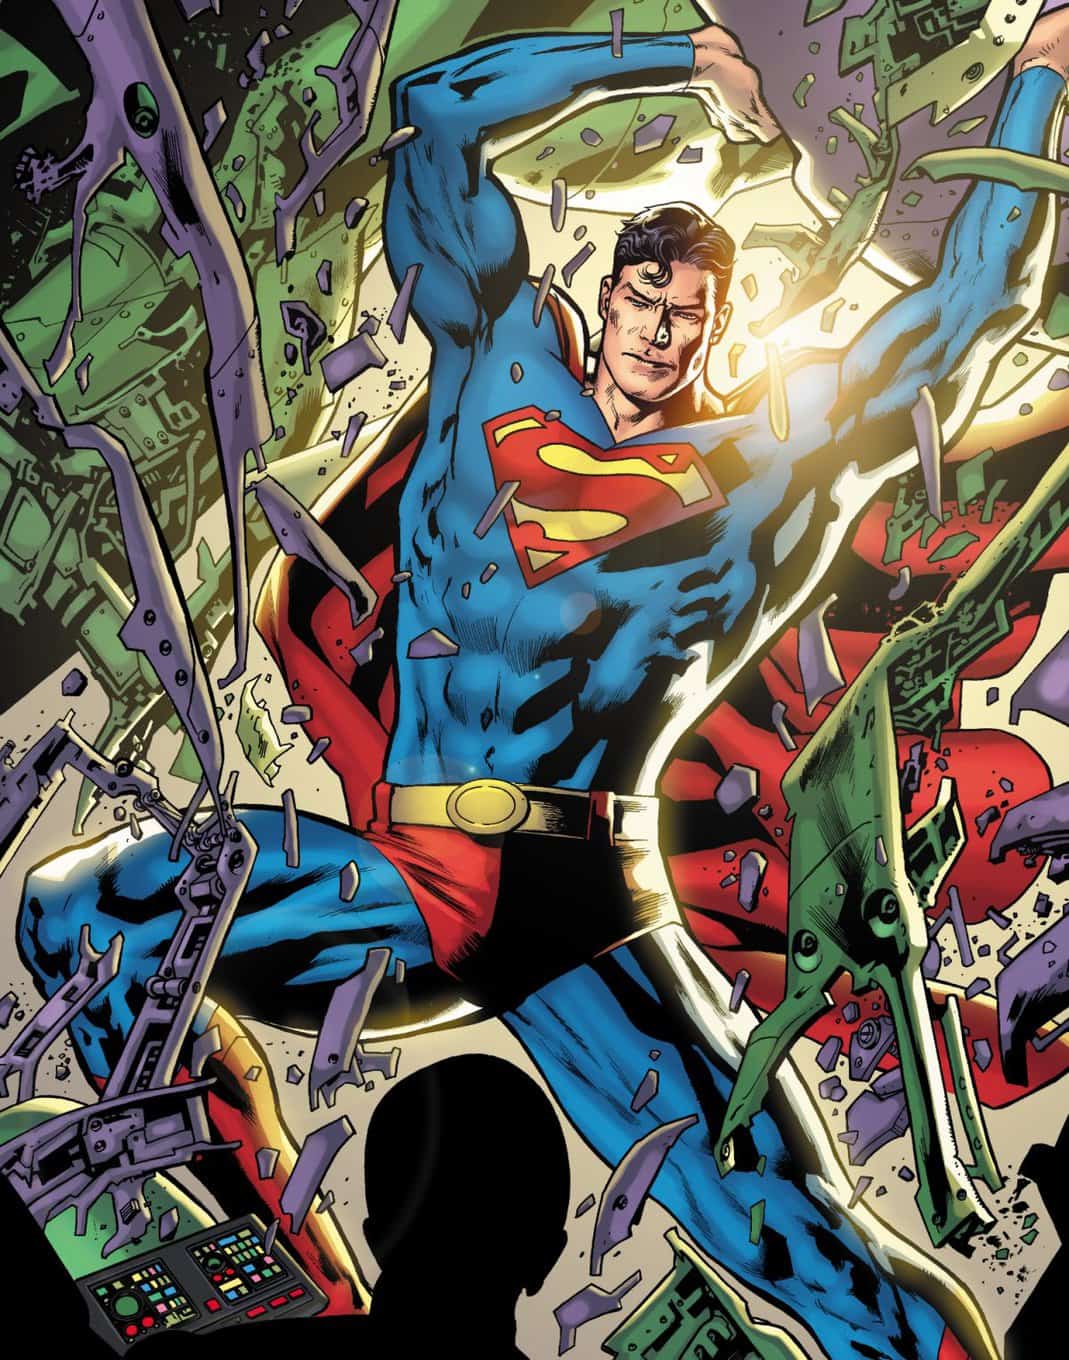 Superman The Last Days of Lex Luthor #1 spoilers A DC Black Label